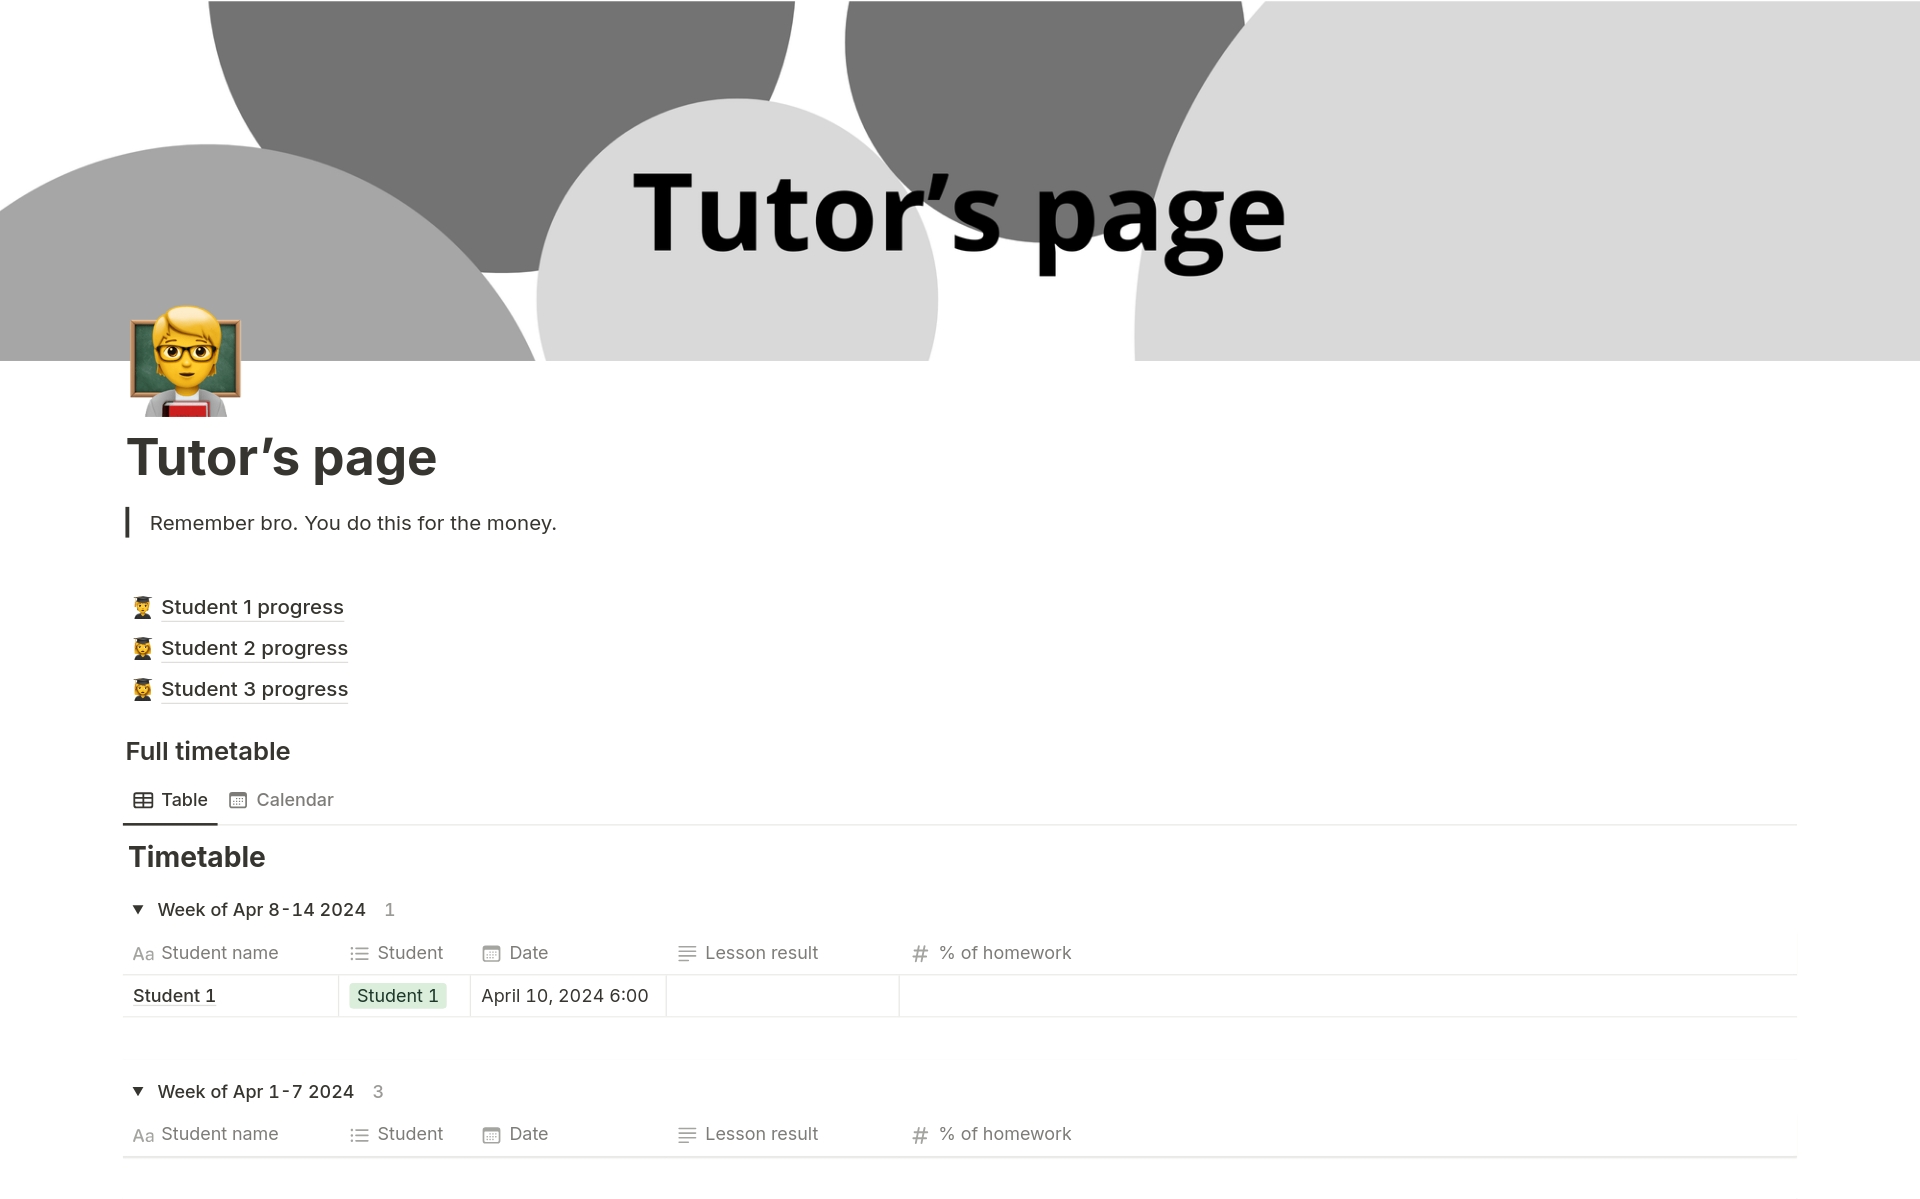 For those tutors who want to make their lessons good paid and productive. You can make an access to Student progress pages for your students, so they can check their progress, coming lessons and grade for their homework. 

Looking forward for your ideas!